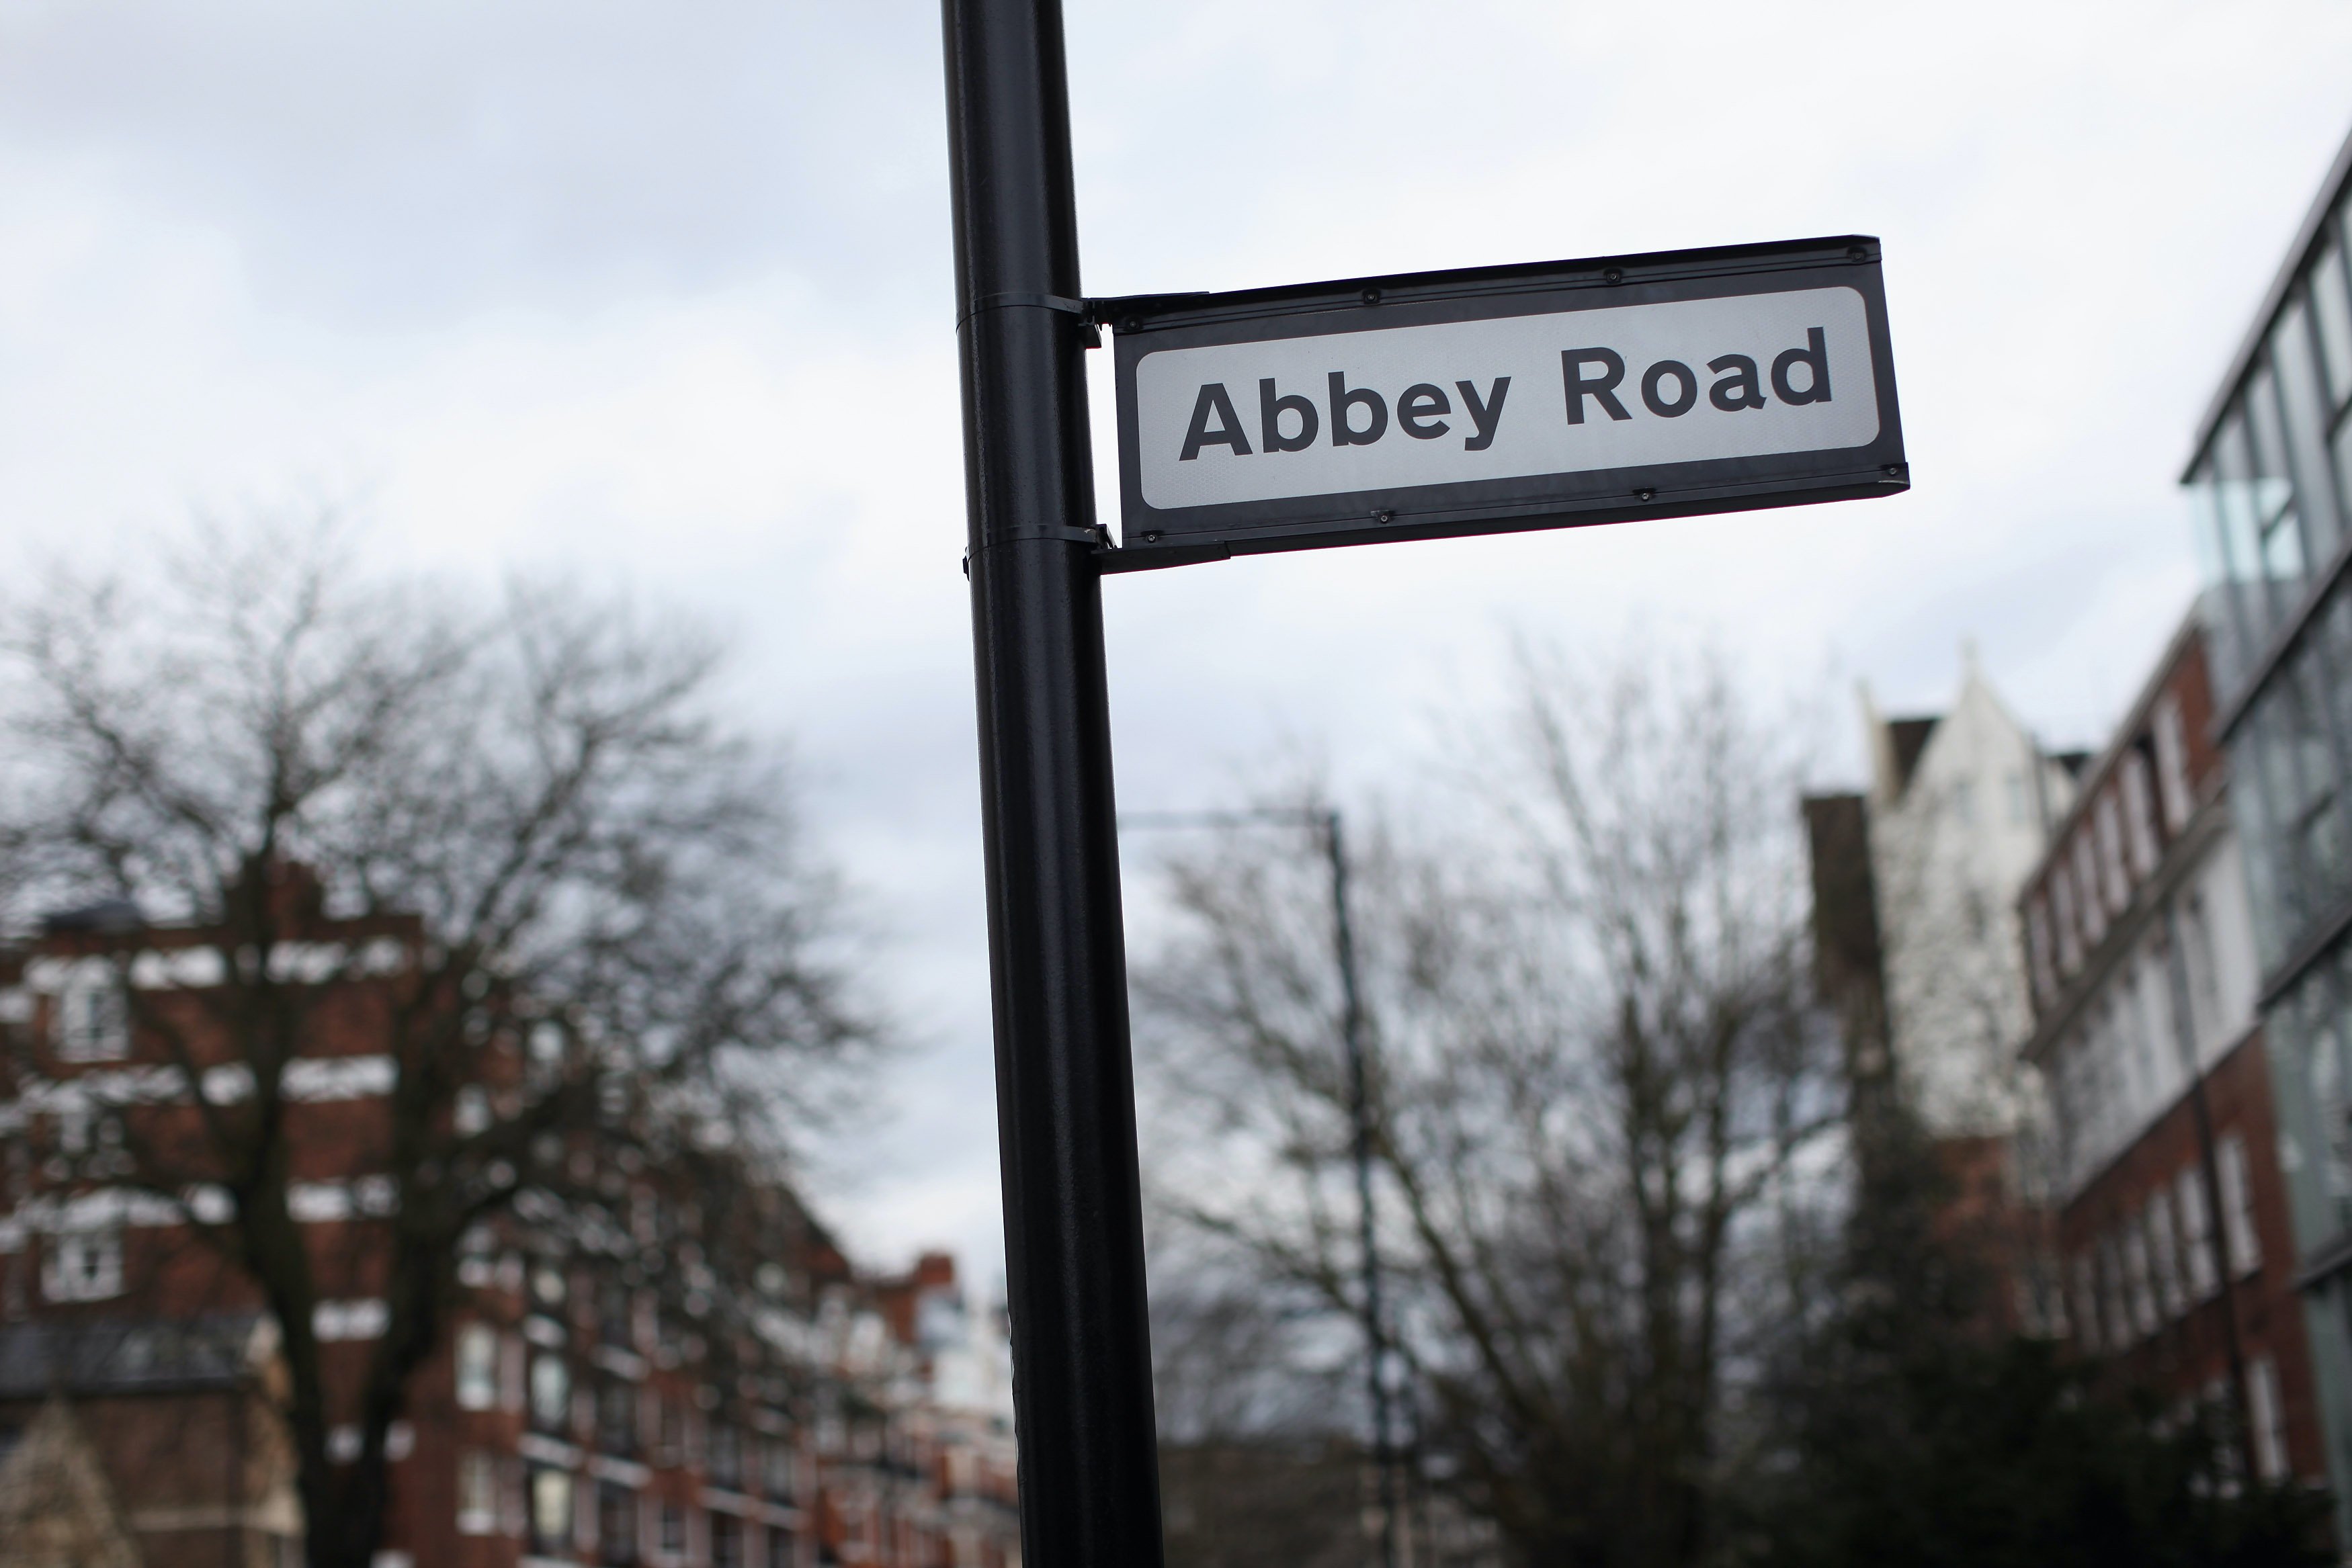 A sign for Abbey Road in London, England, made famous by The Beatles